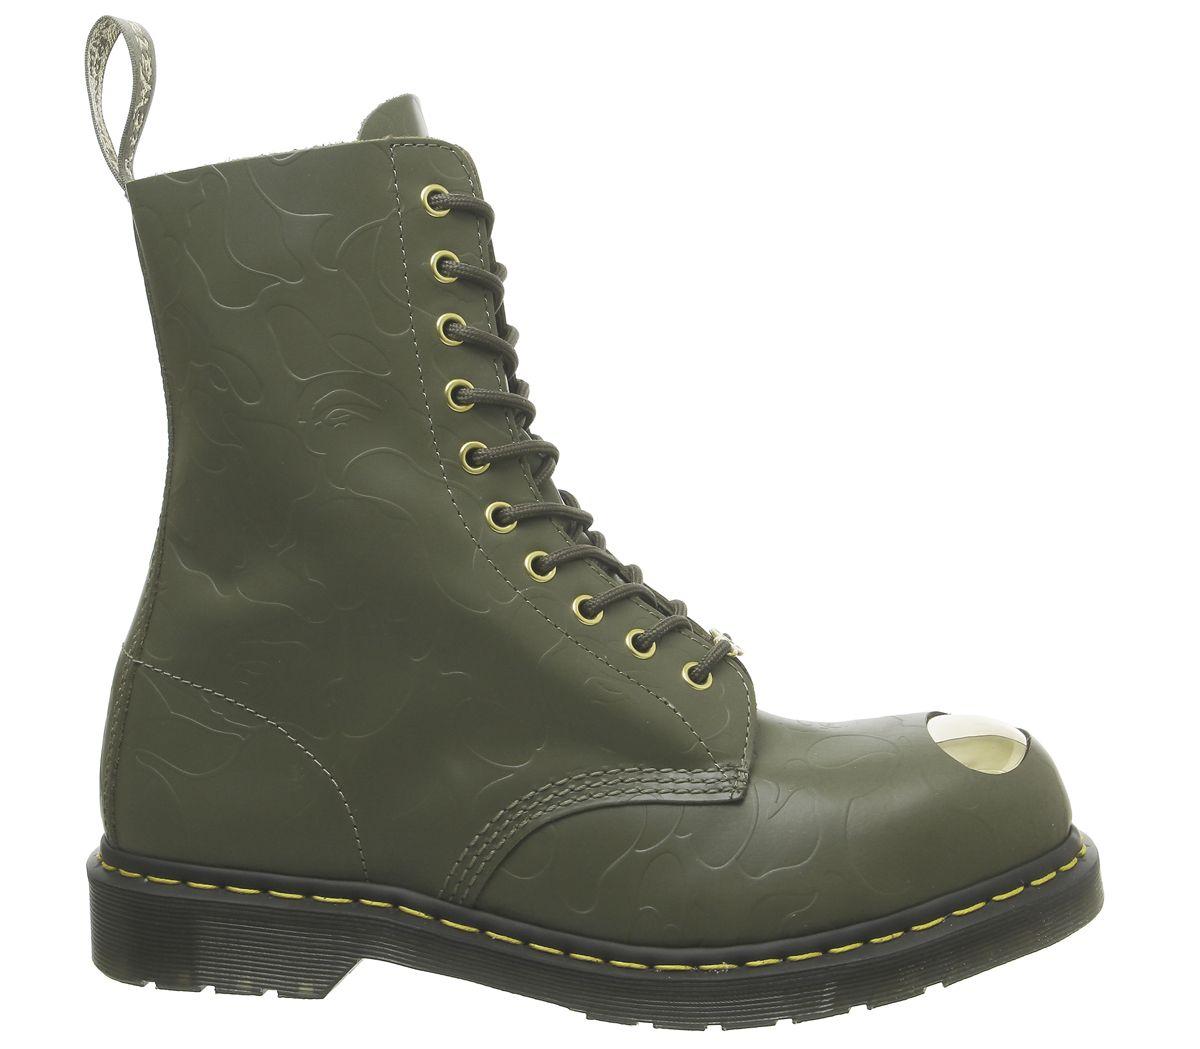 Dr. Martens Leather Bape X Dr.martens Abc 10 Hole Steel Toe Cap Boot in